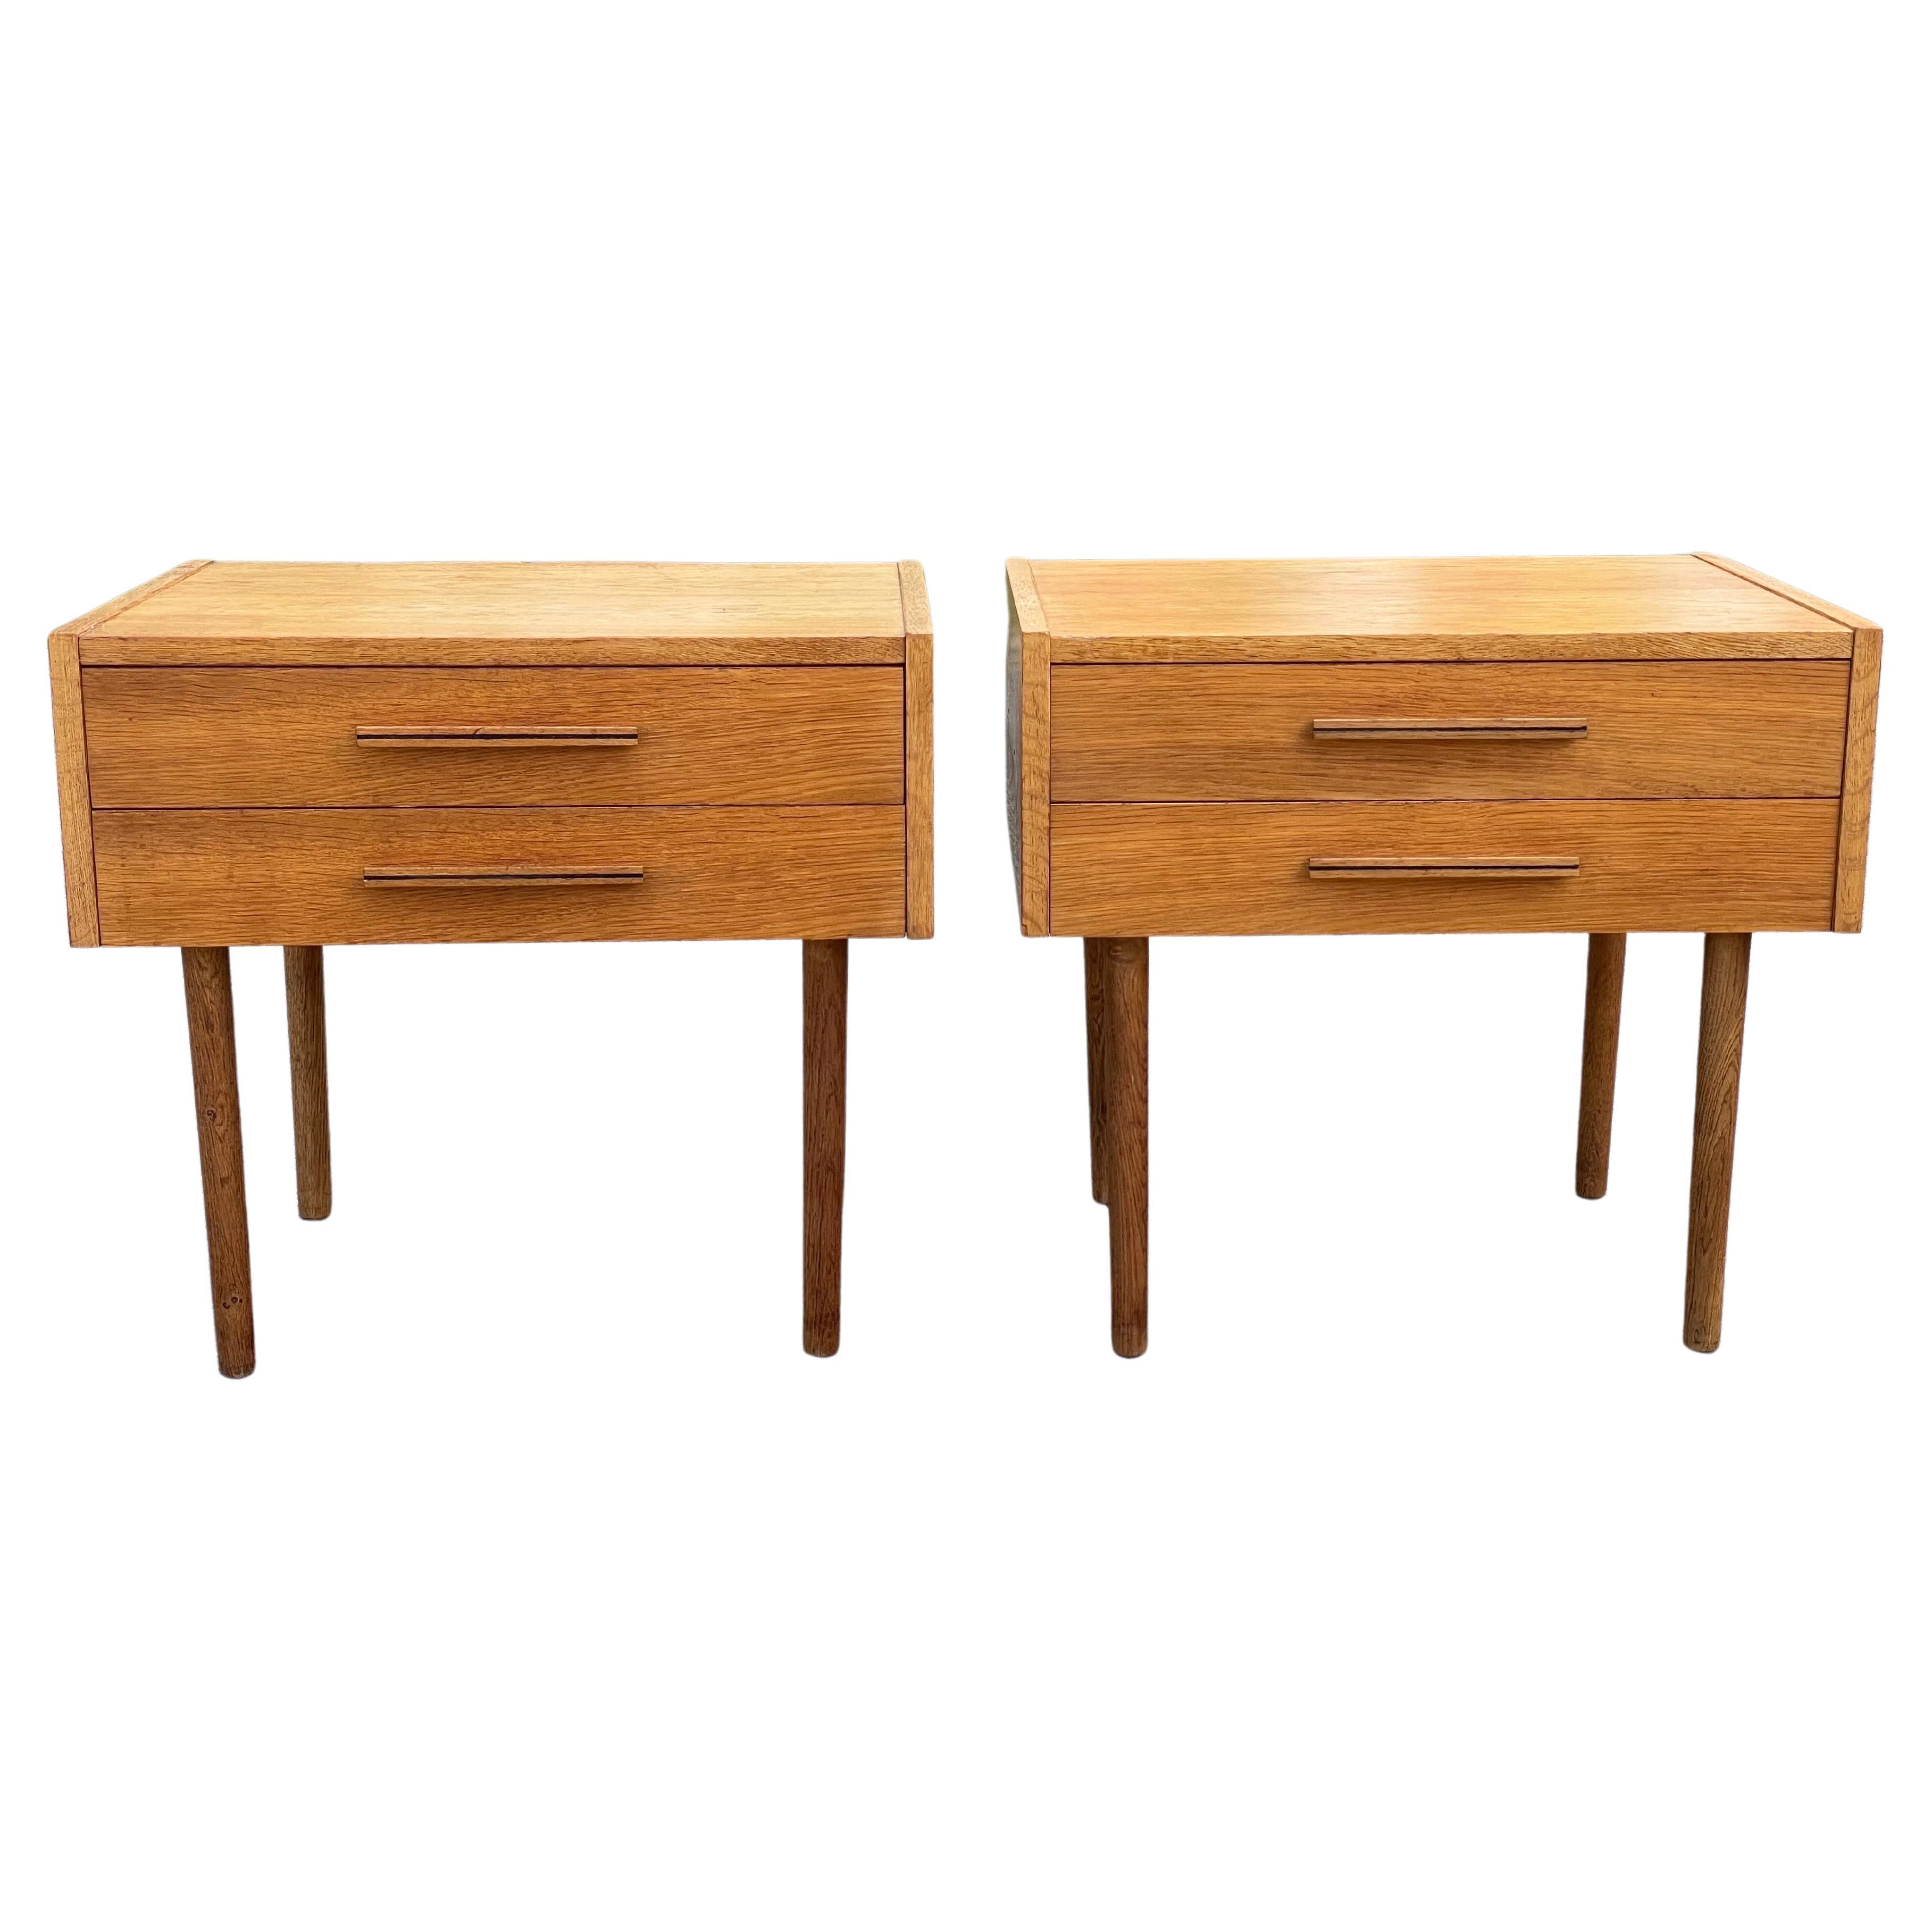 Set of Spacious Danish Mid-Century Modern Nightstands from the 1960s